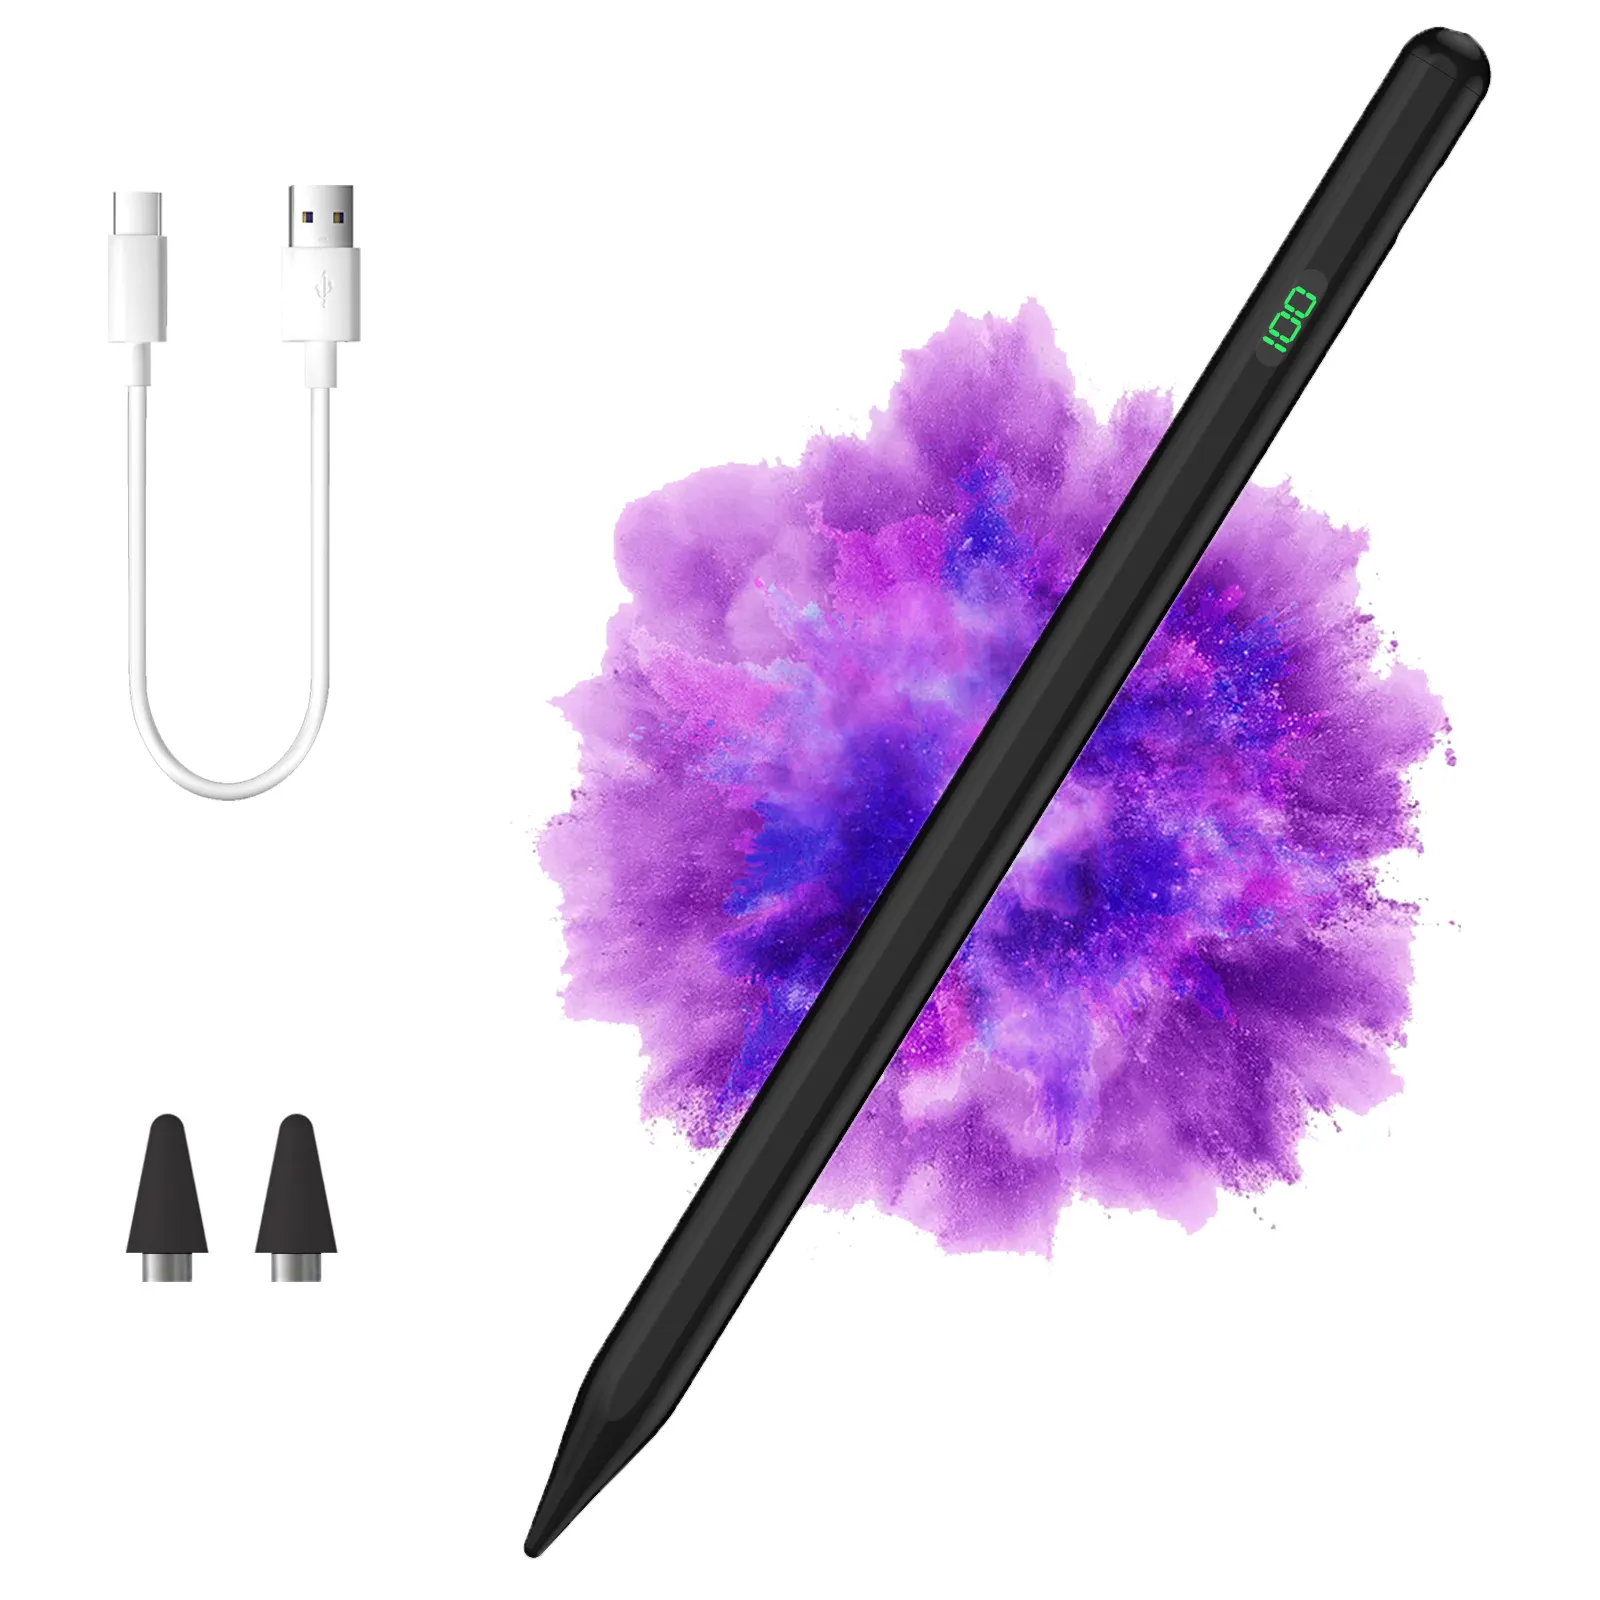 Anti-Mistouch Mobile Touch Pen Handwriting Stylus Pen for Android iOS Win Touch Screens Devices Point Touch Screen Pen